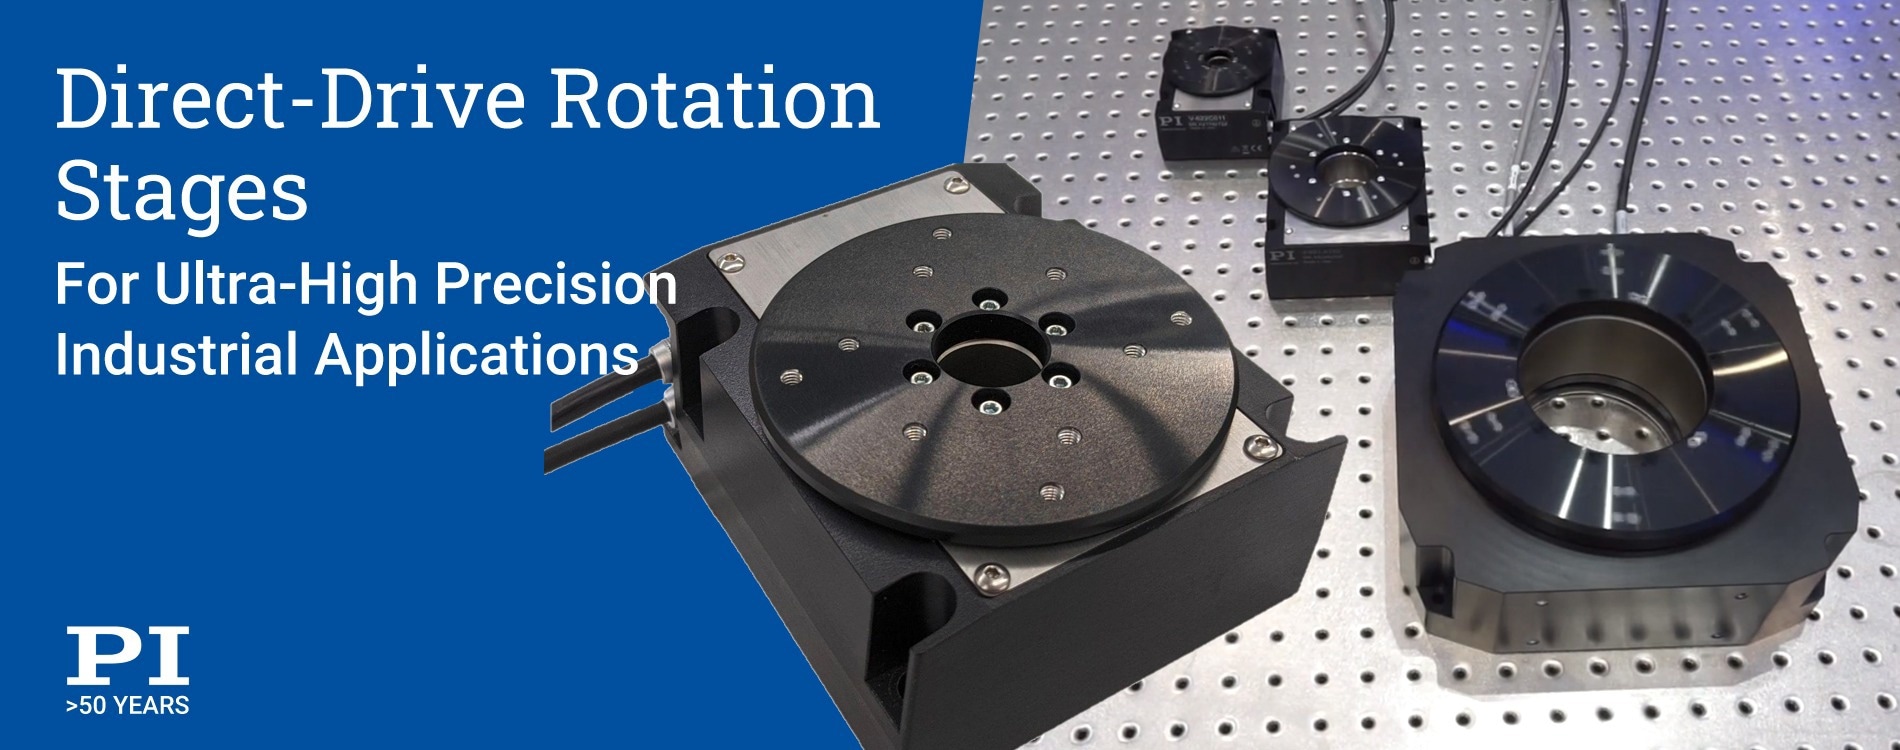 New Direct-Drive Rotation Stages for Ultra-High Precision Industrial Applications